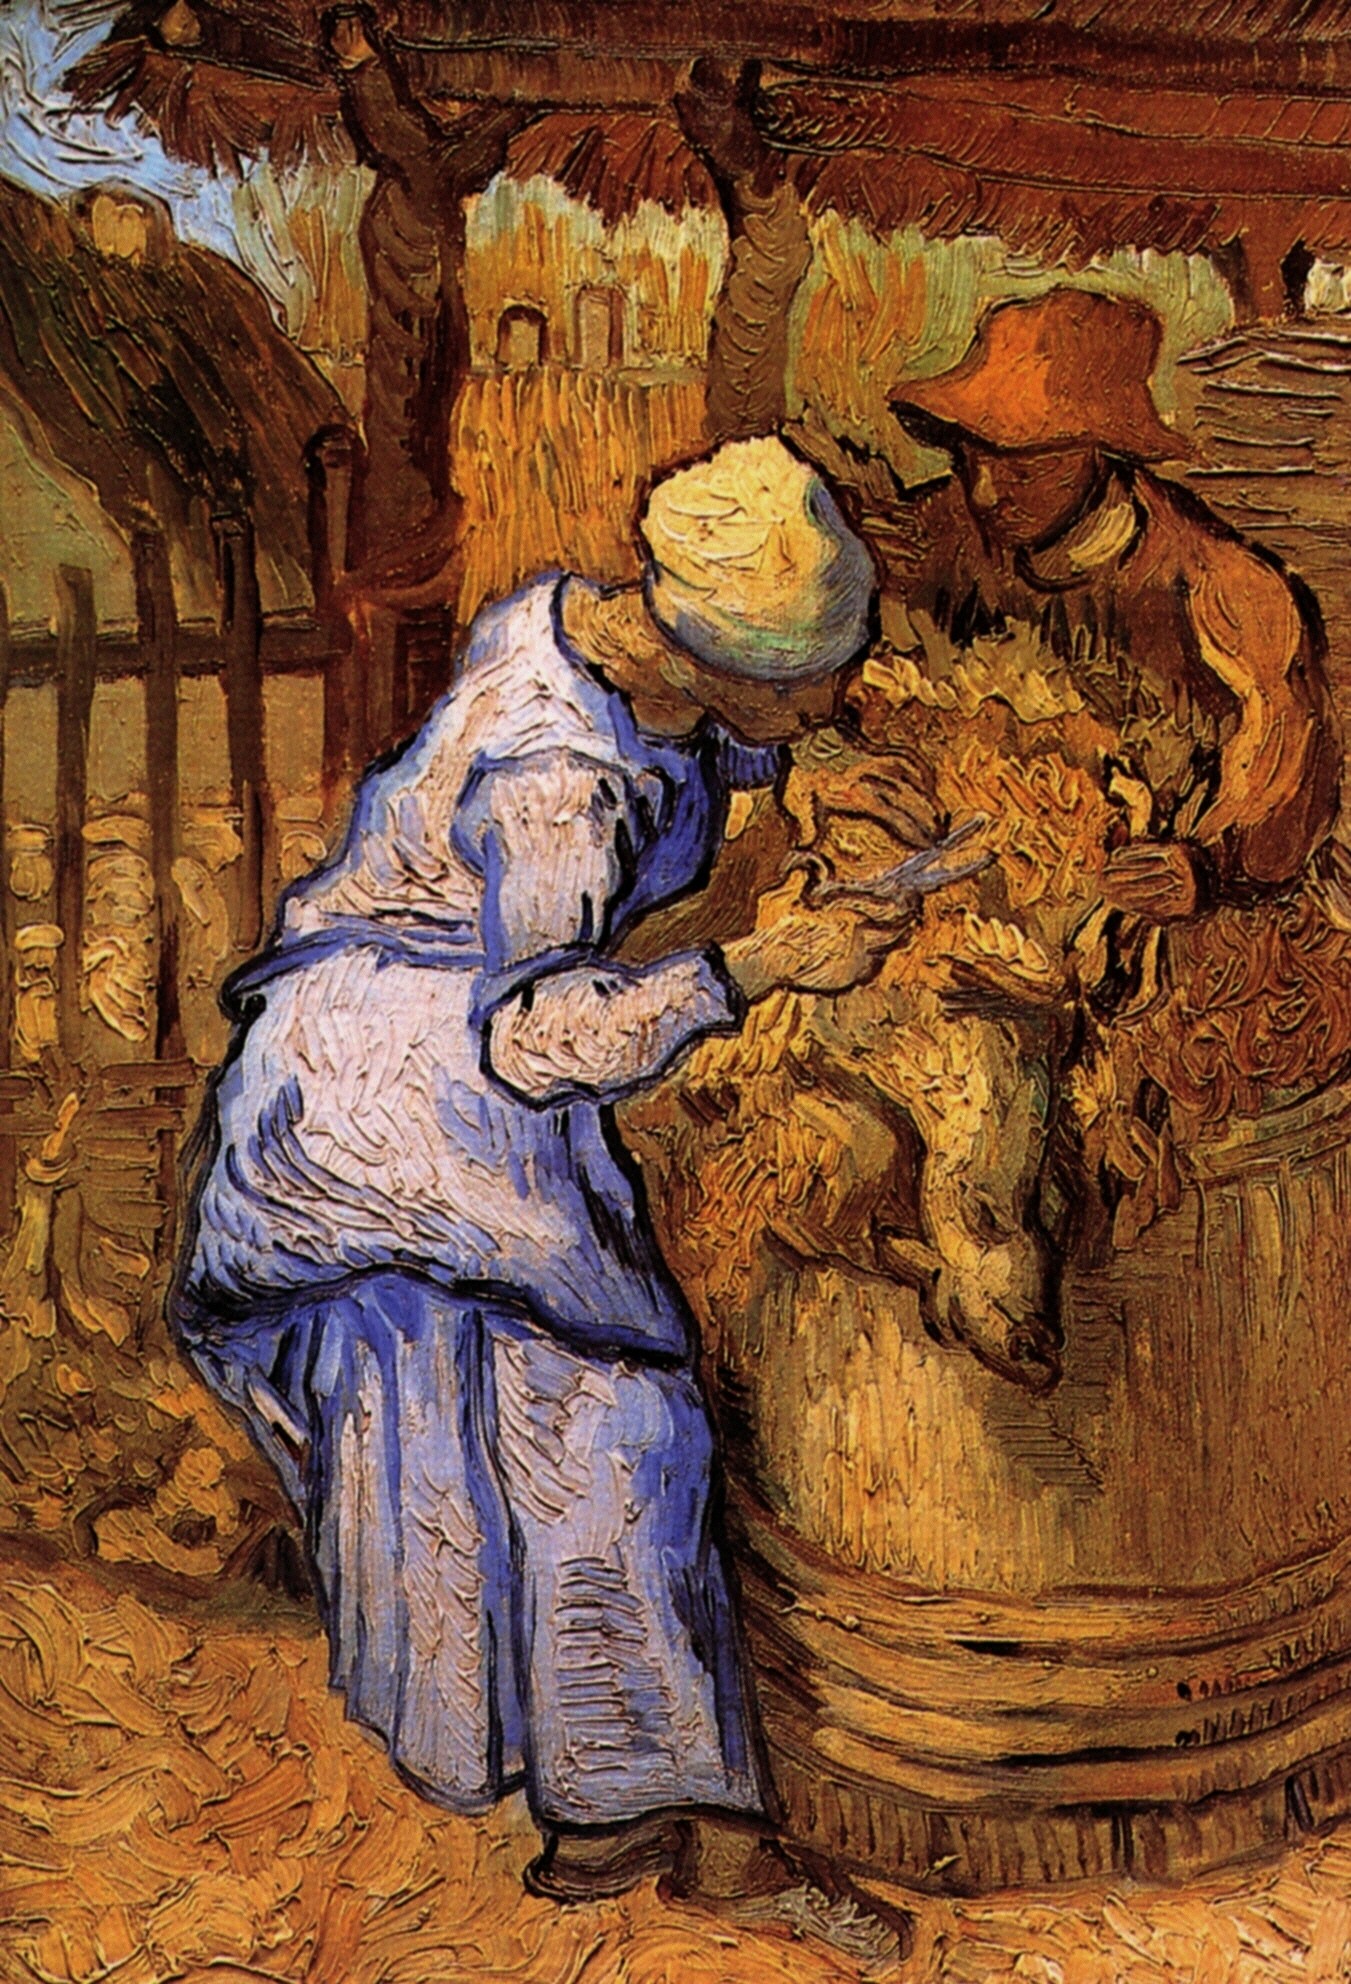 Sheep-Shearers, The after Millet - Van Gogh Painting On Canvas